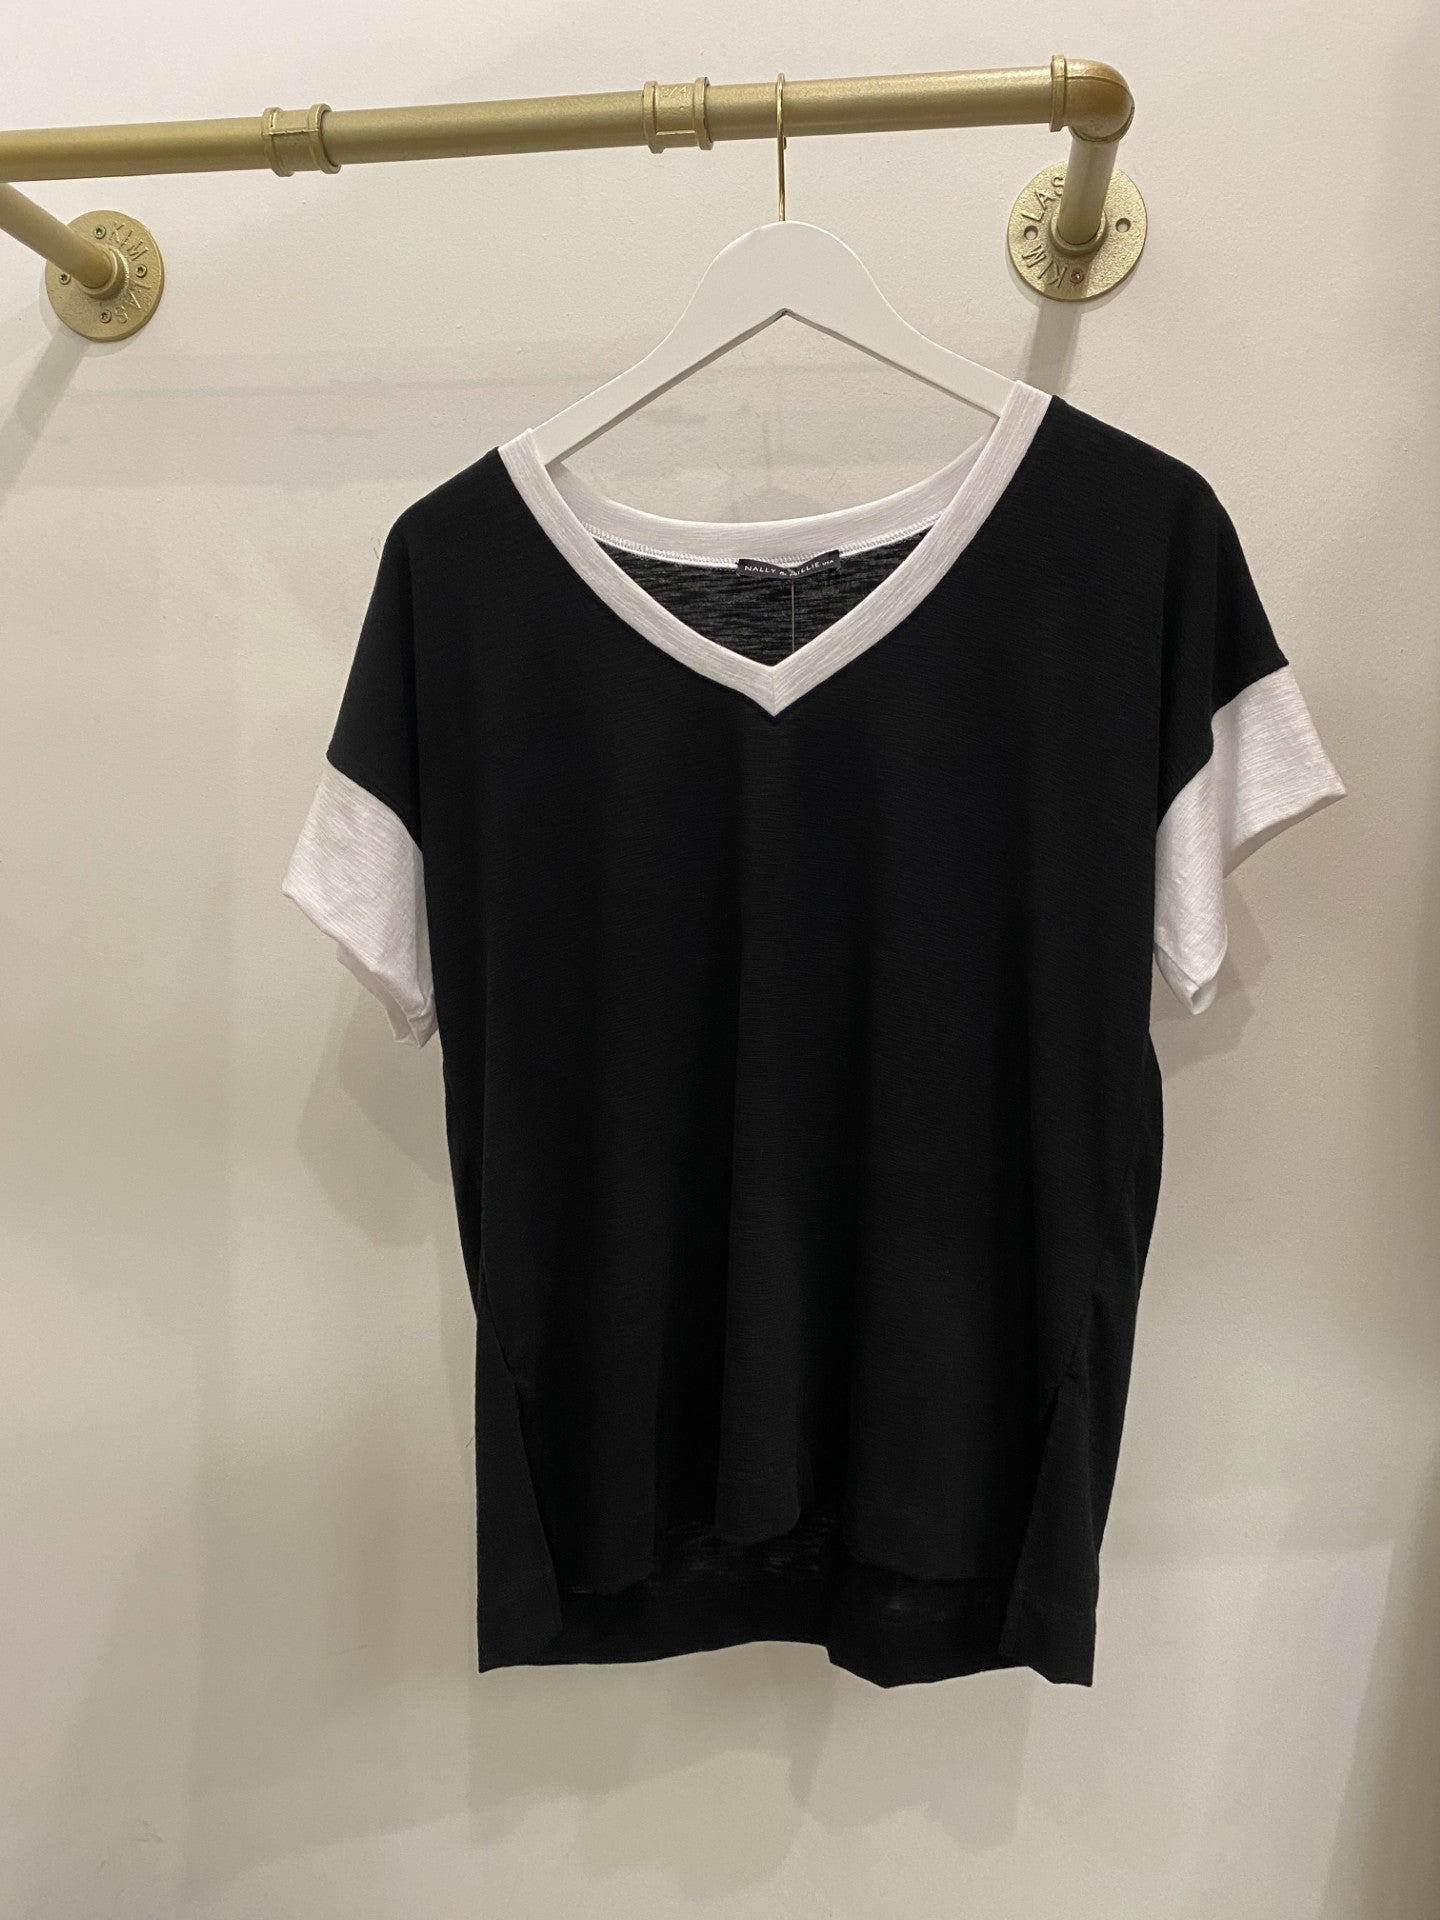 Black and White Short Sleeve Top